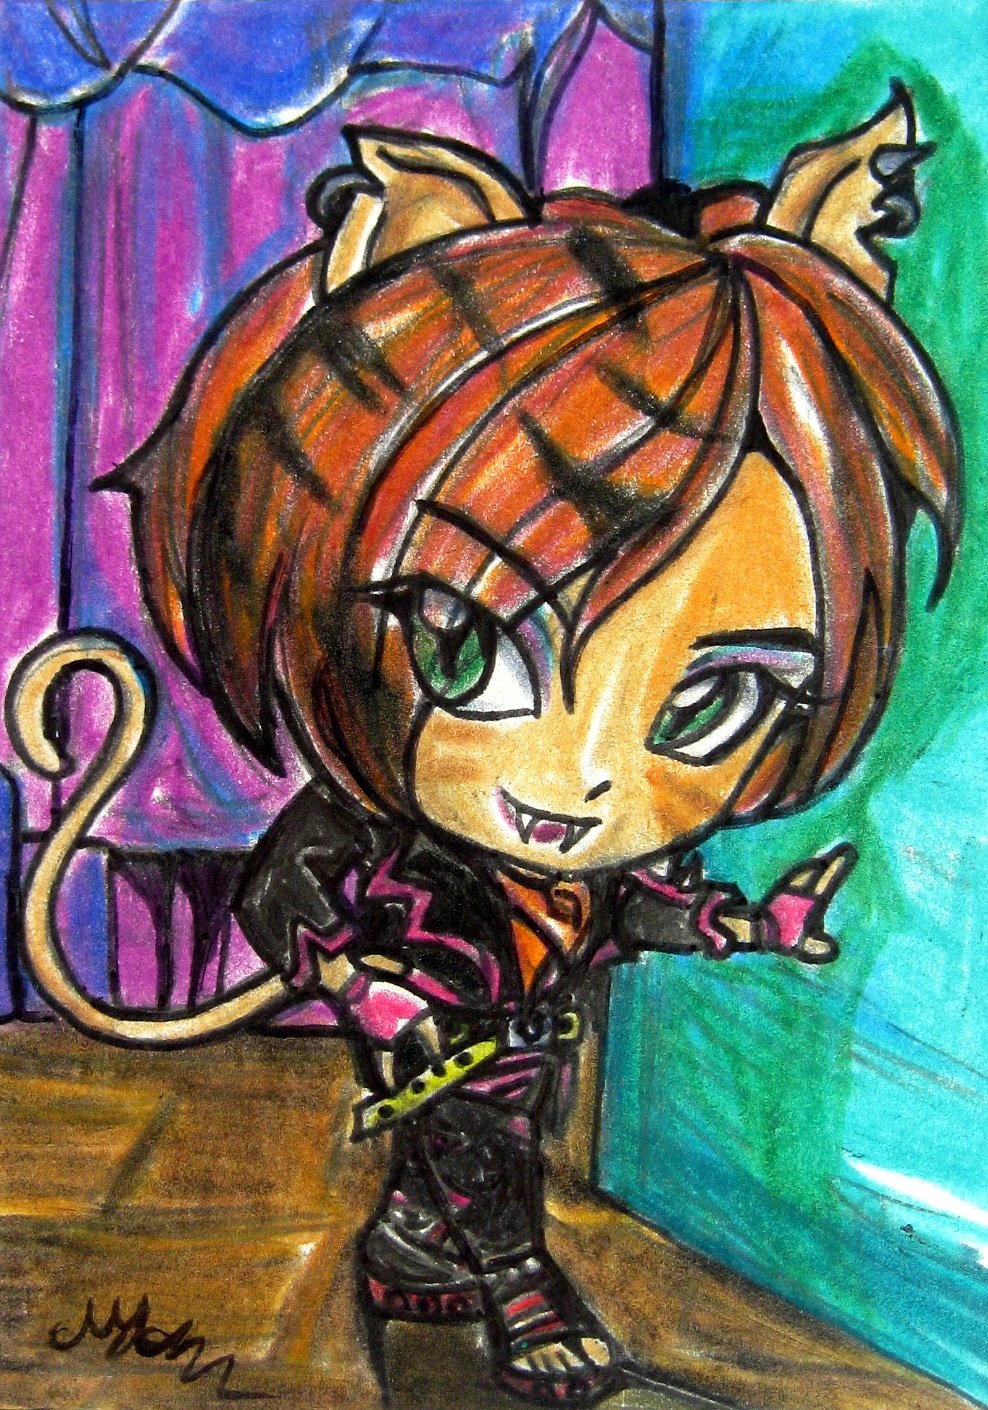 Monster High Toralei Stripes Werecat Japanese Anime Original Sketch Card Drawing ACEO PSC 1/1 Maia